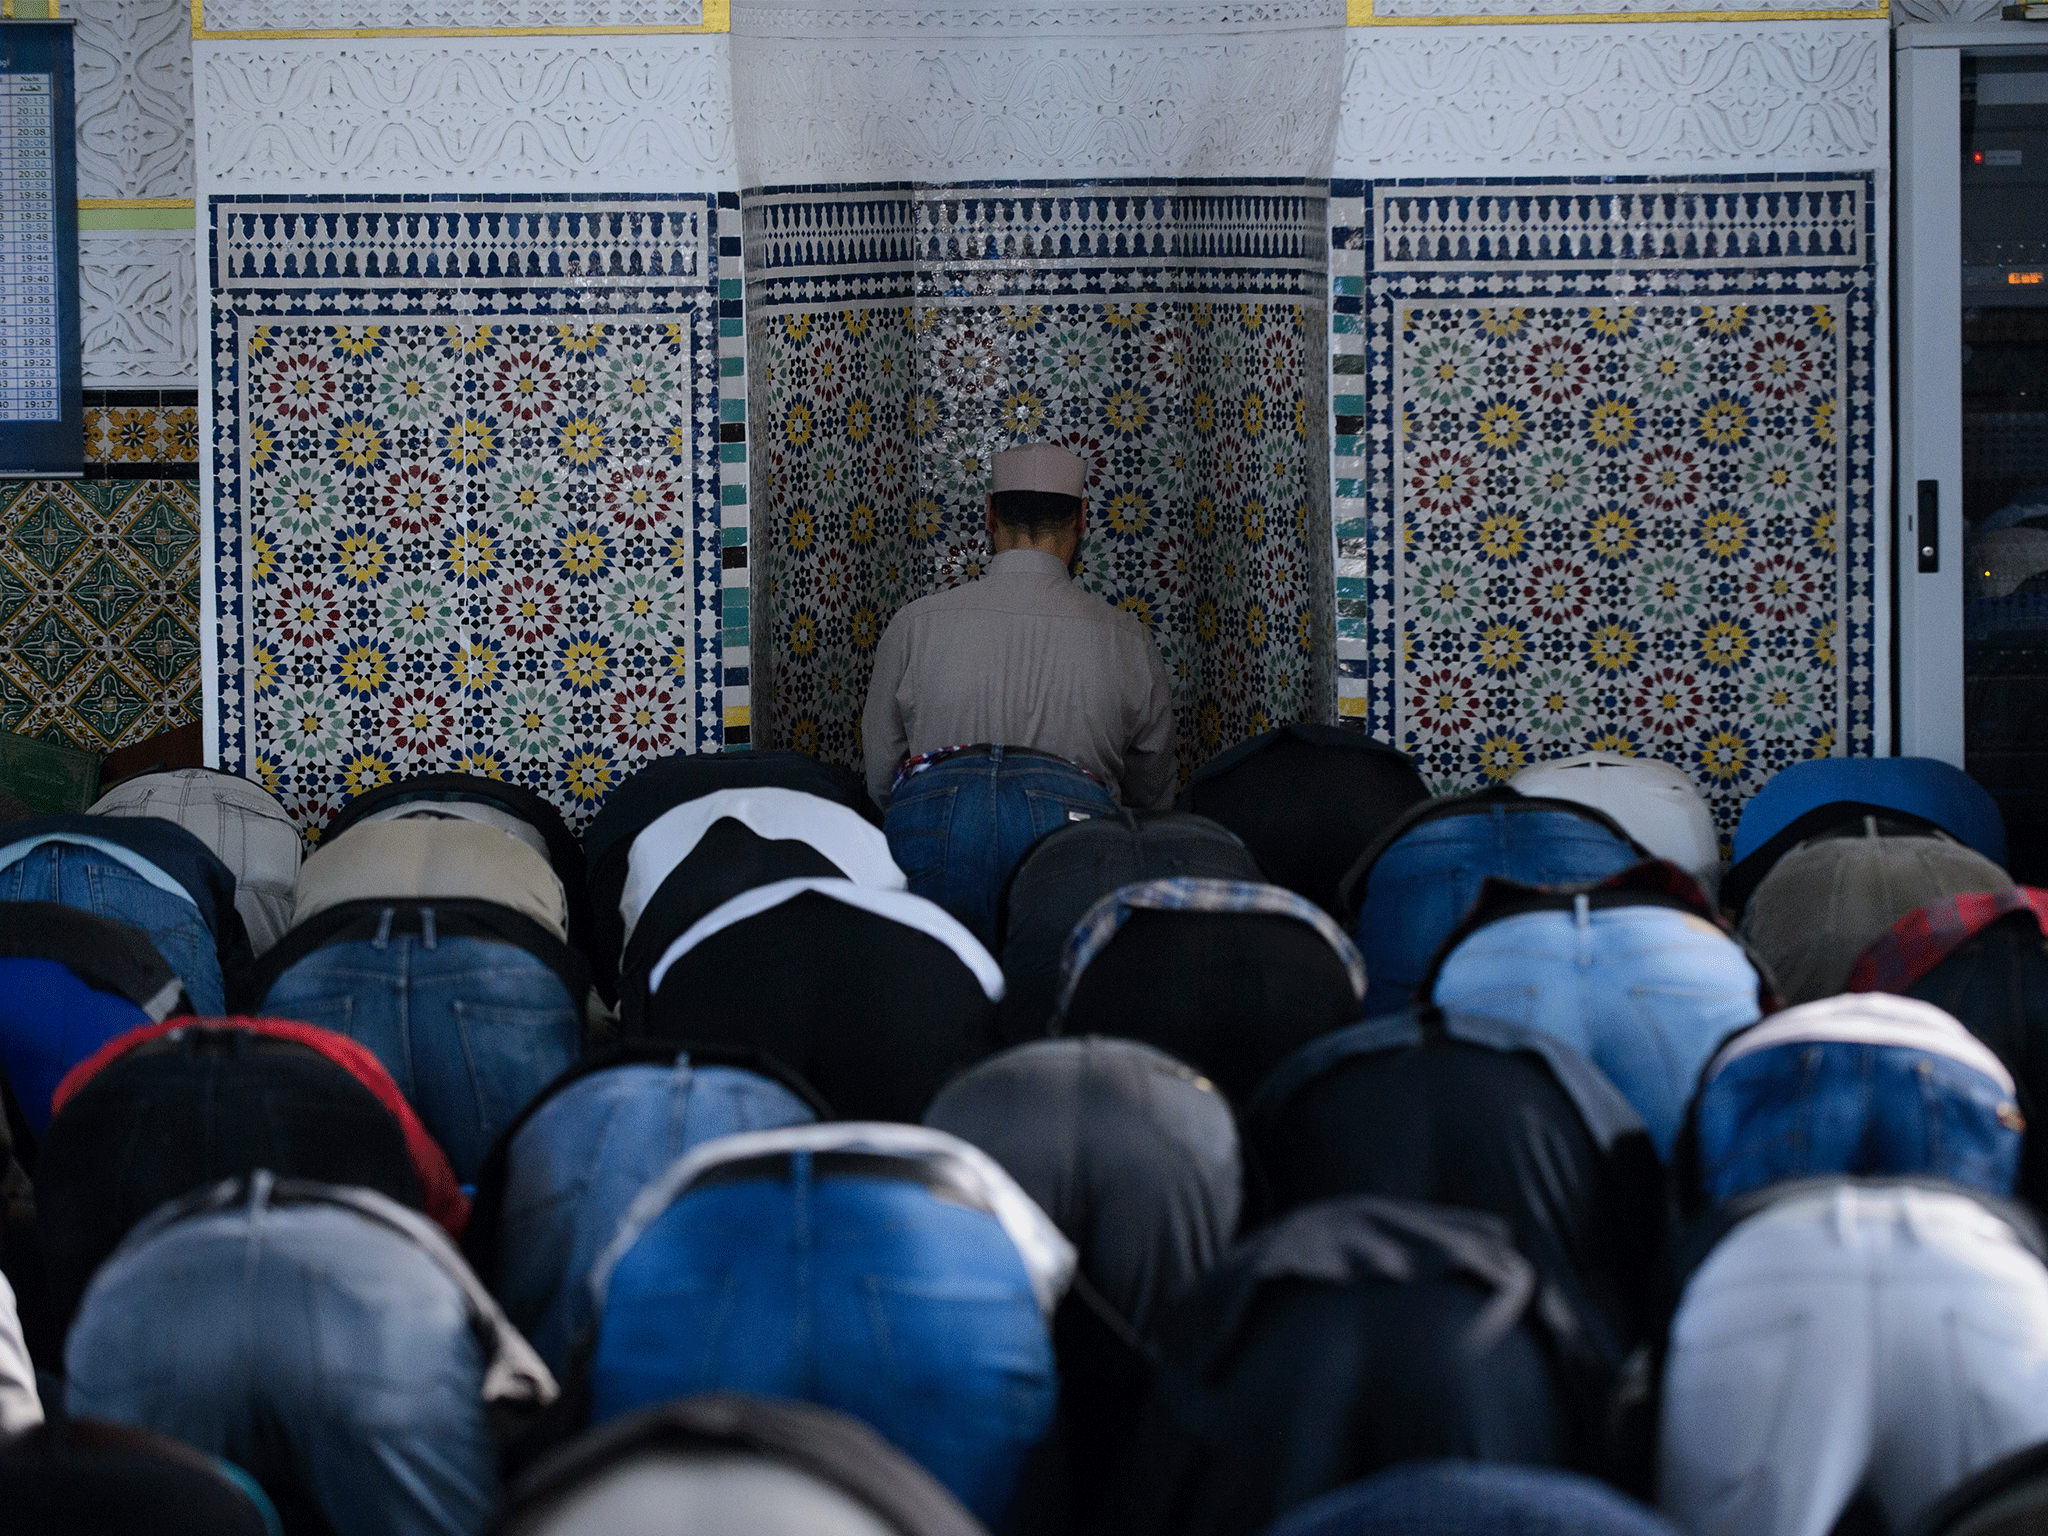 Austria to close mosques and oust imams in ‘political Islam’ crackdown